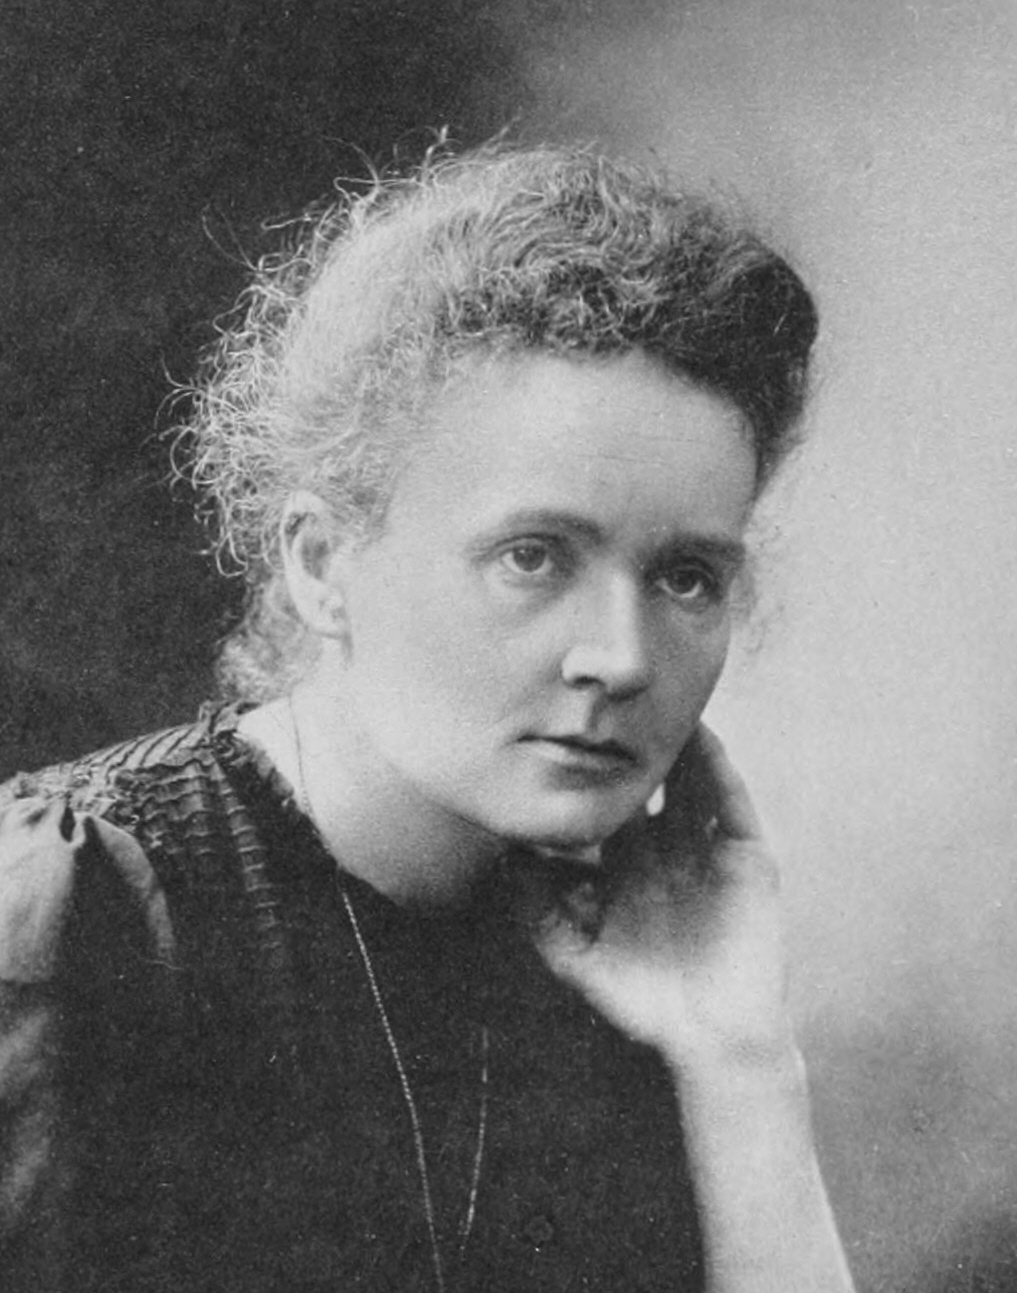 Top 10 Famous Women Scientists in History - Marie Curie